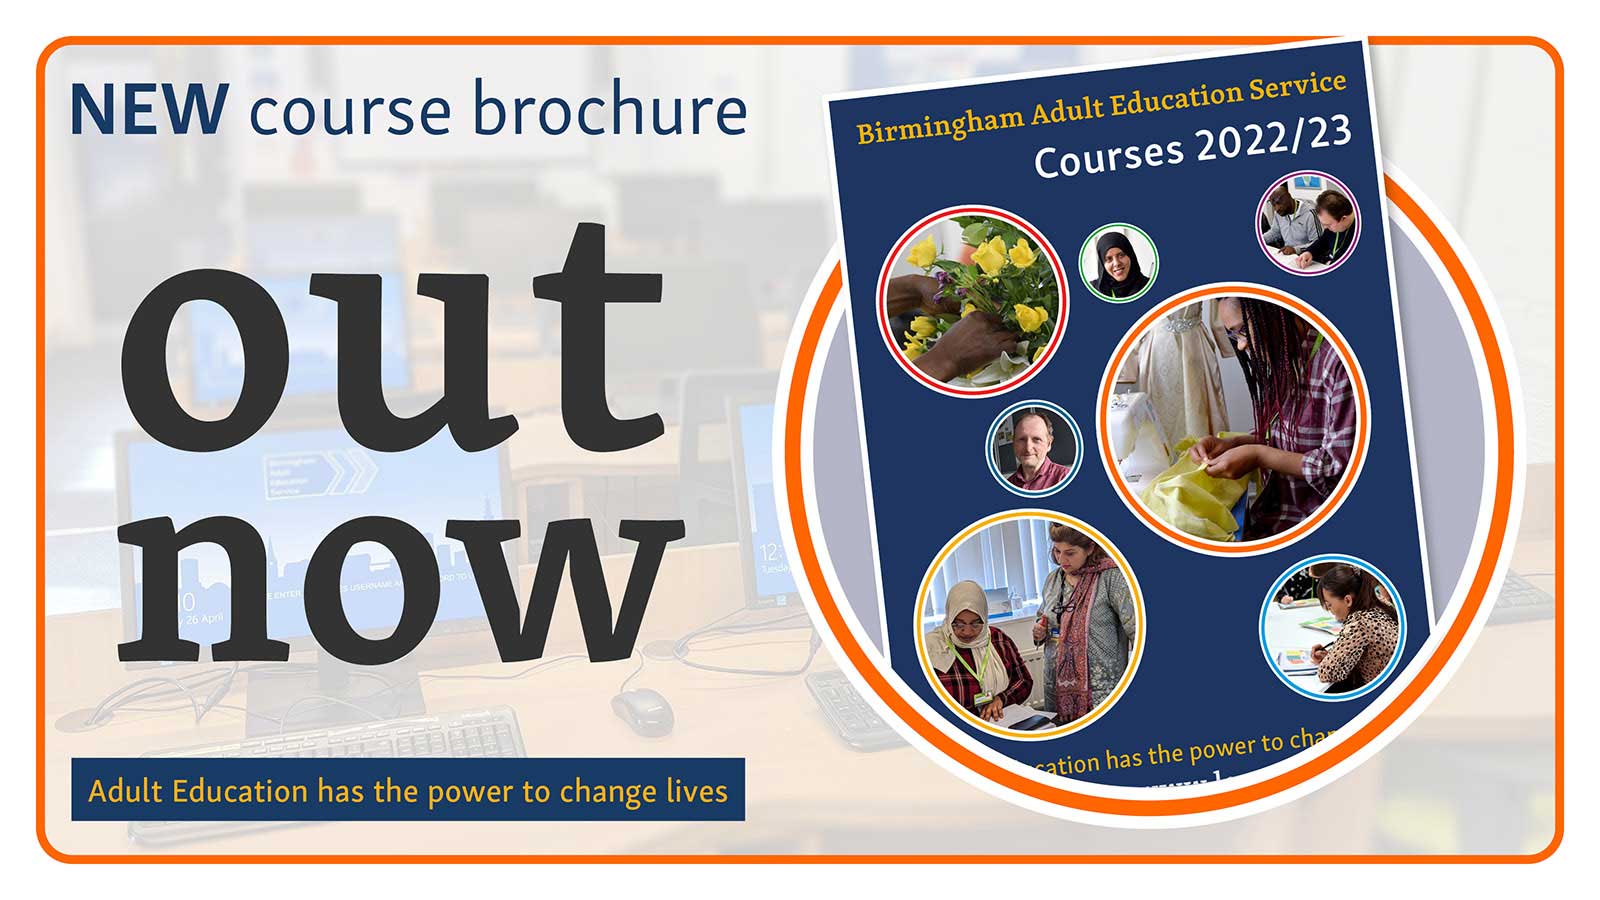 New course brochure